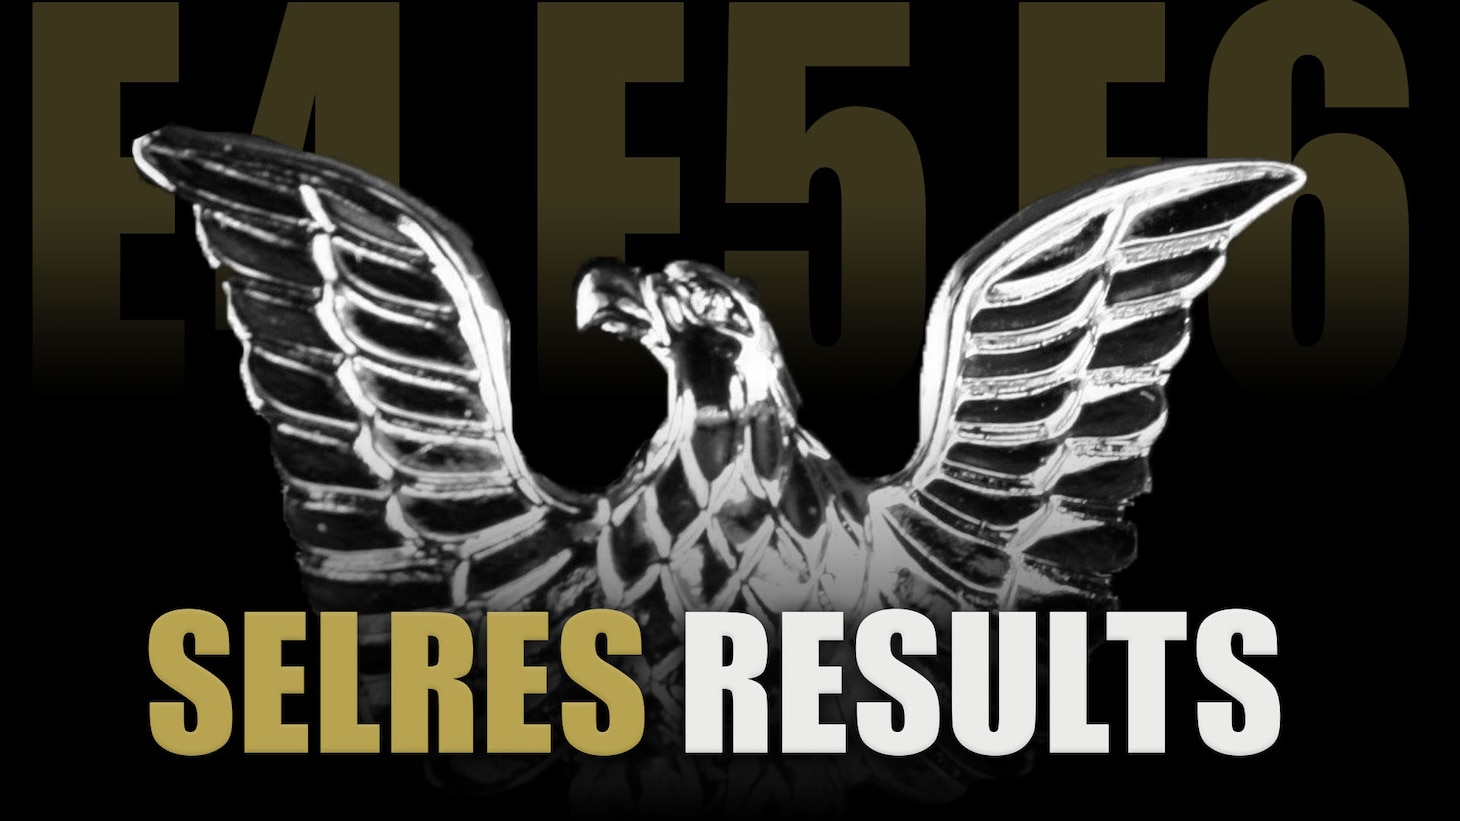 A silver petty officer crow on a black background with the words "SELRES Results" in bold below.